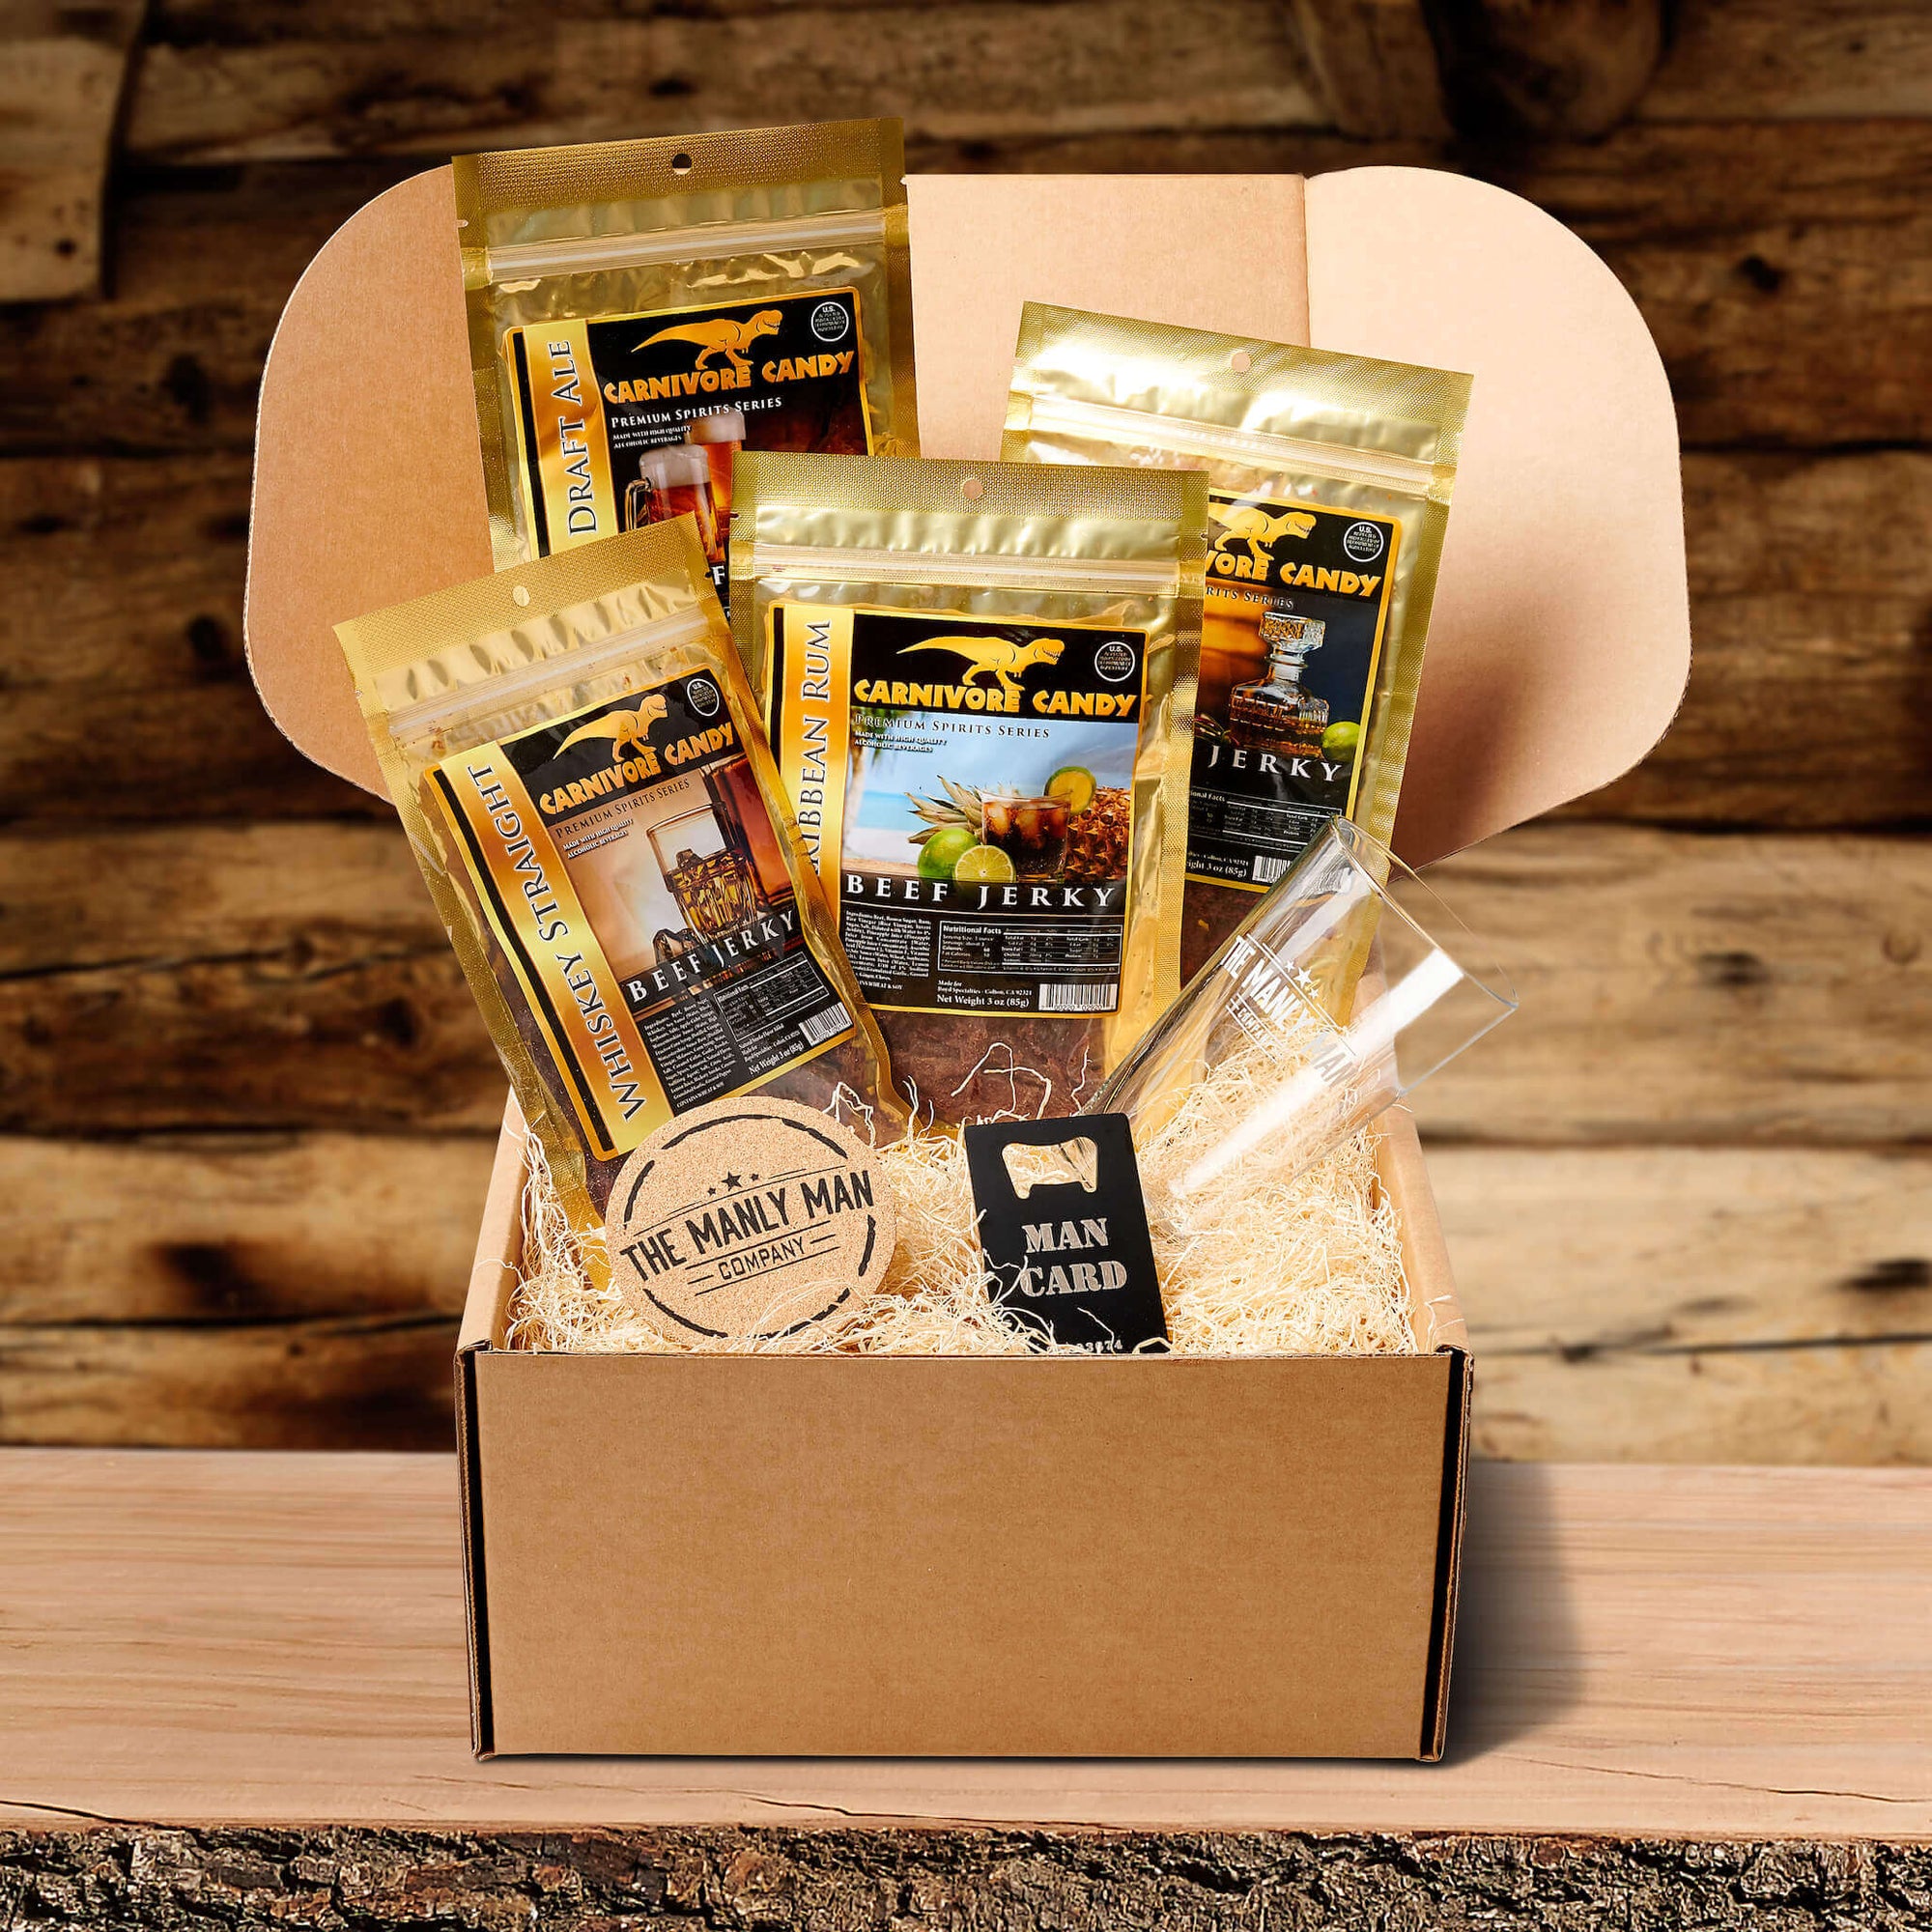 Manly jerky snack gift set, sitting on log table